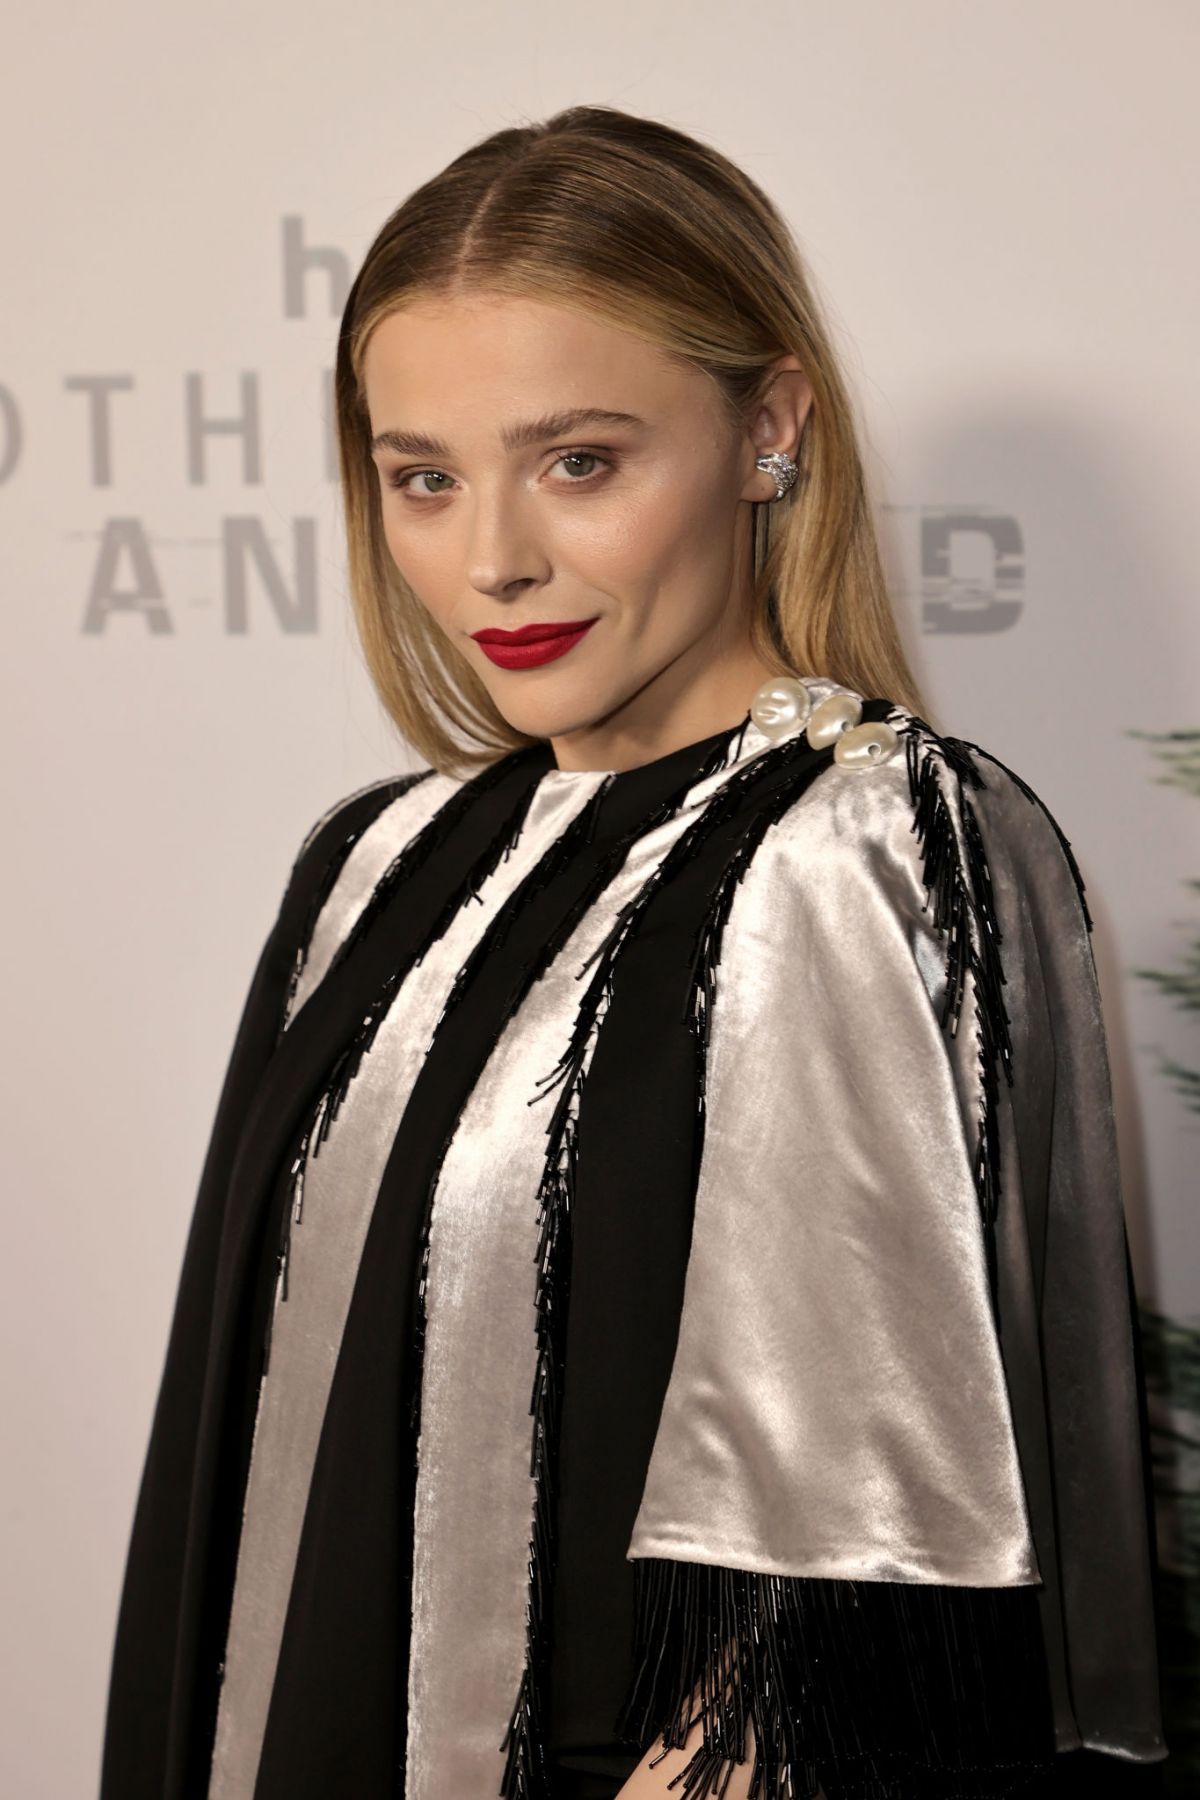 chloe-moretz-at-mother-android-premiere-at-neuehouse-in-hollywood-12-15-2021-6.jpg